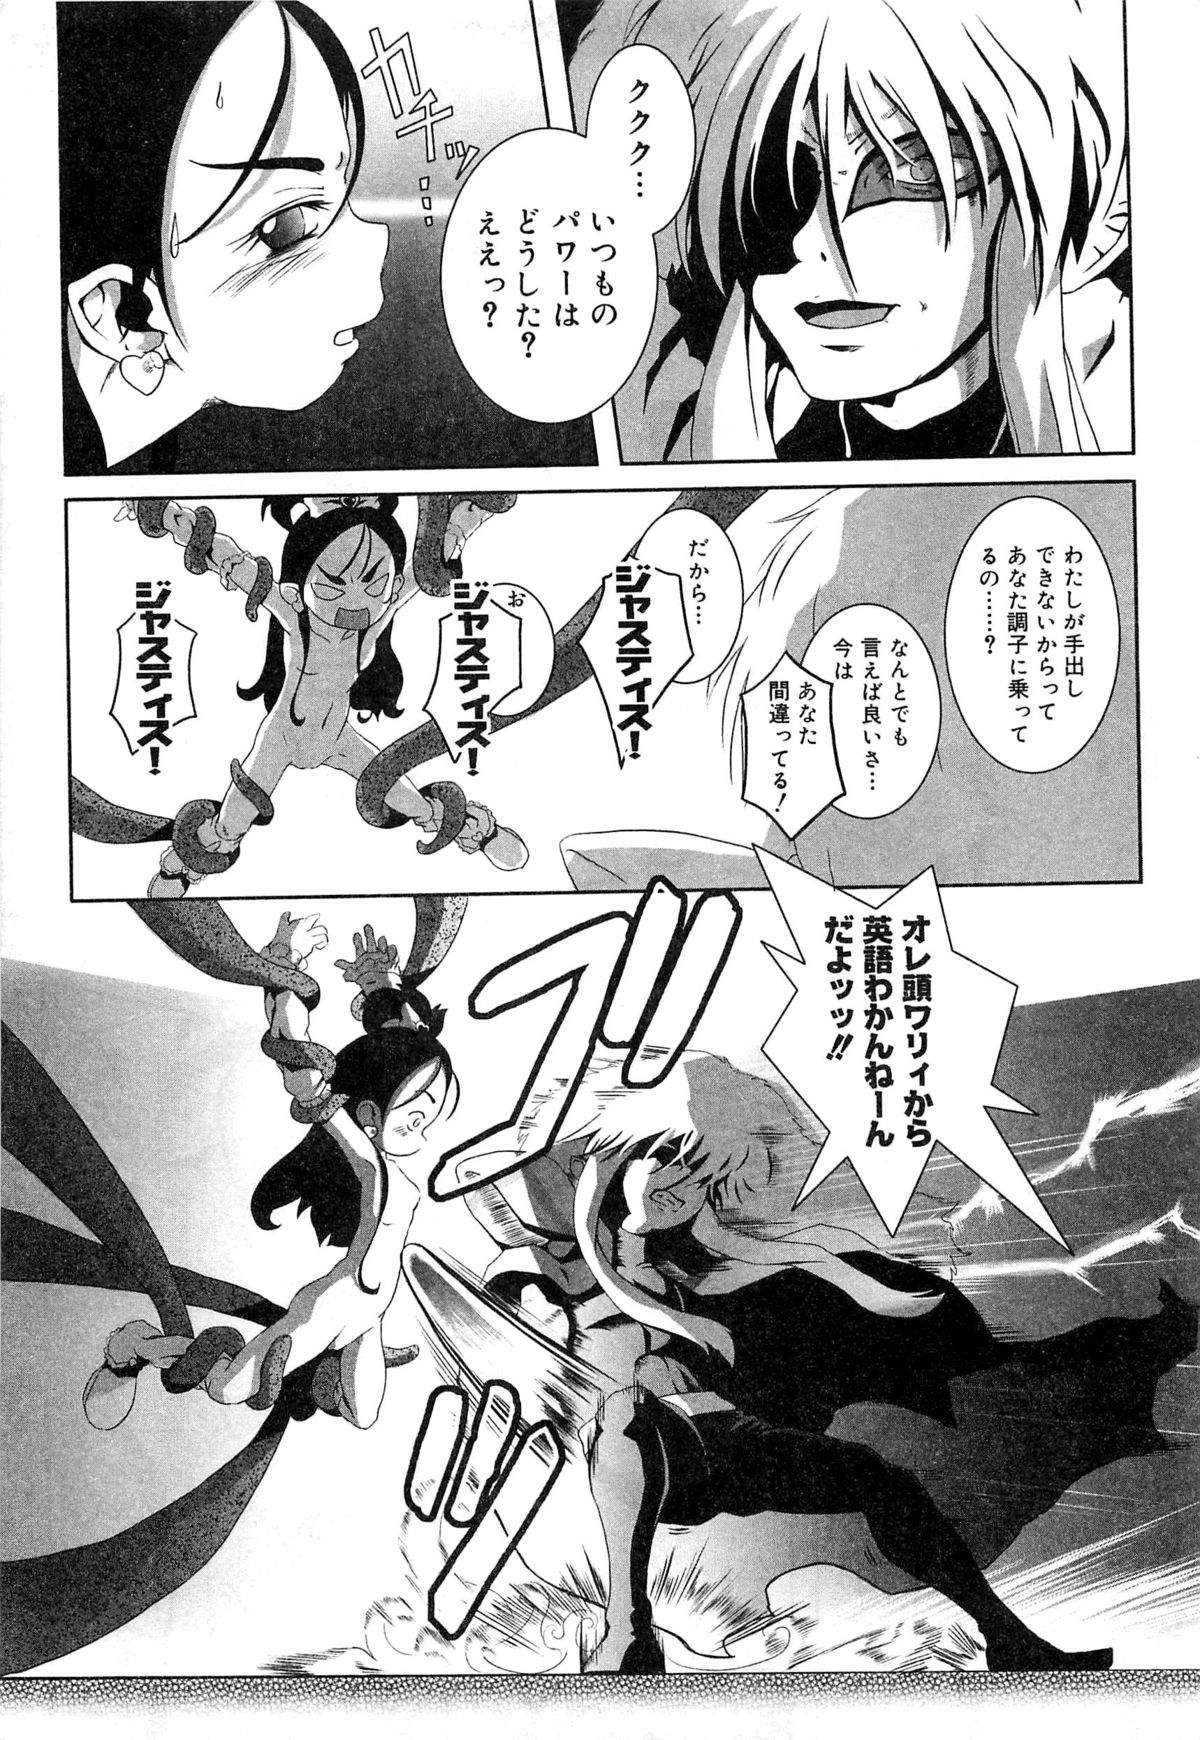 [Anthology] Cure Cure Battle Precure Eroparo page 16 full